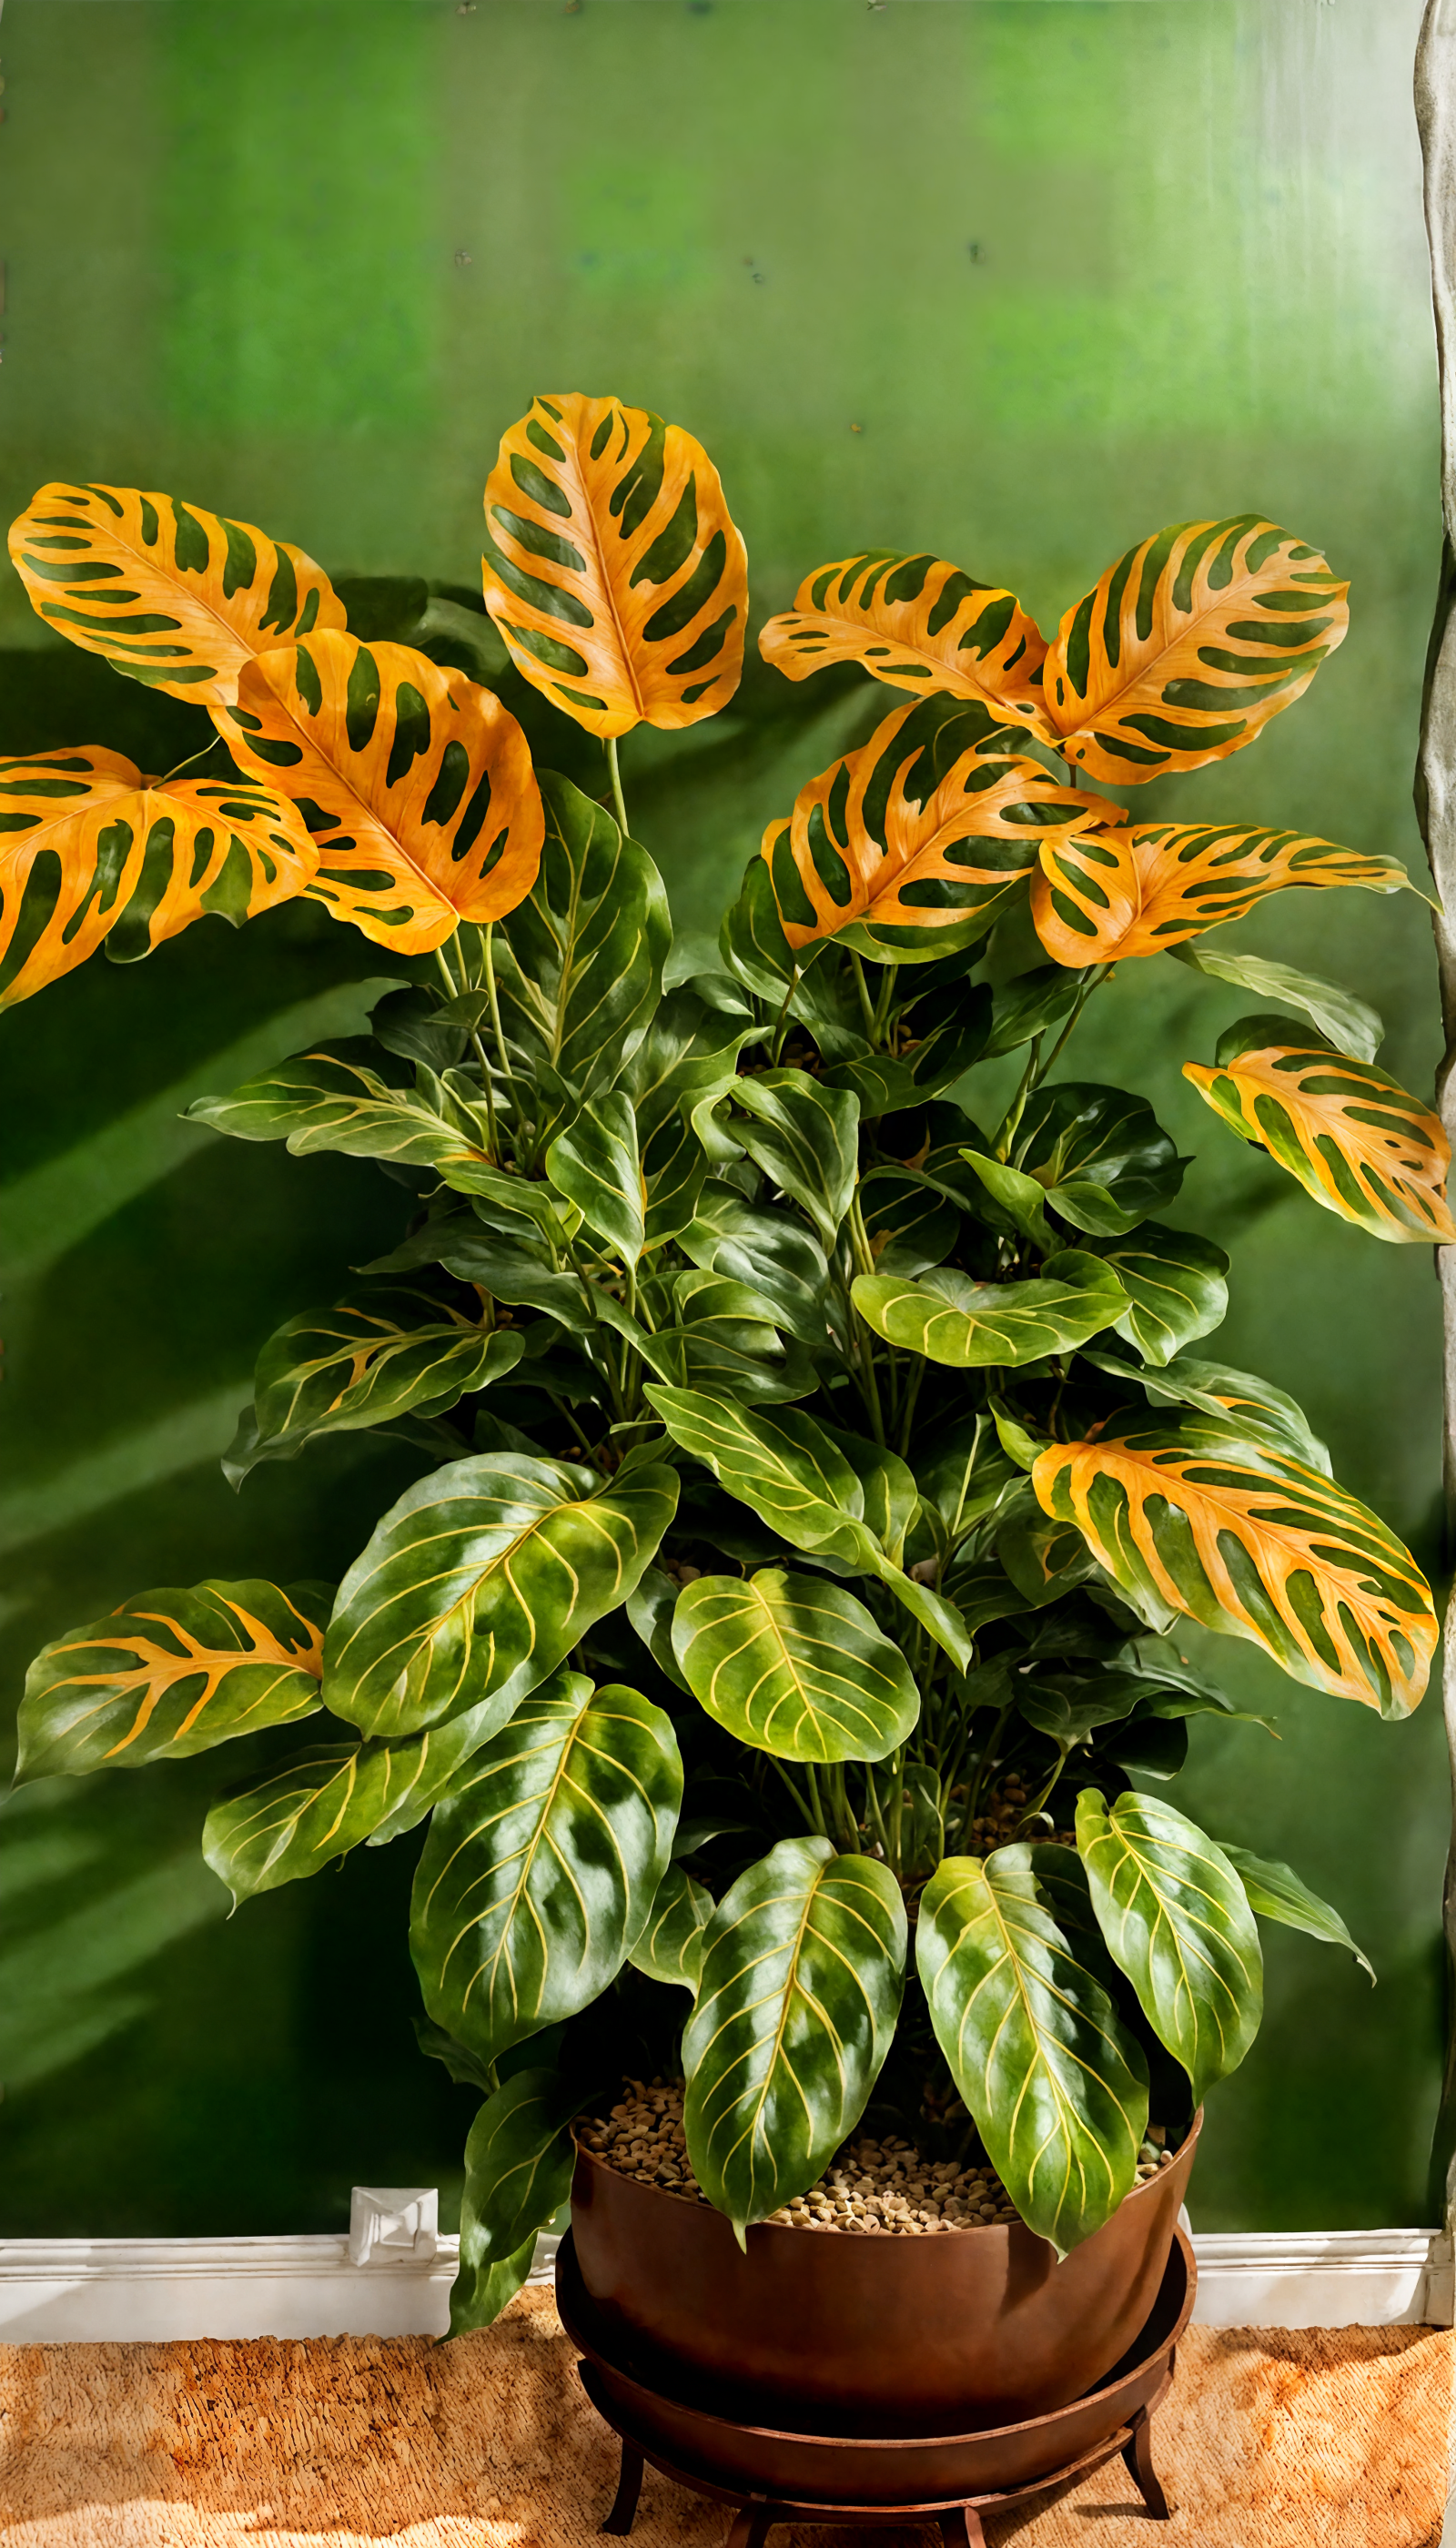 Maranta leuconeura with vibrant leaves in a rustic planter, indoor setting with neutral decor.